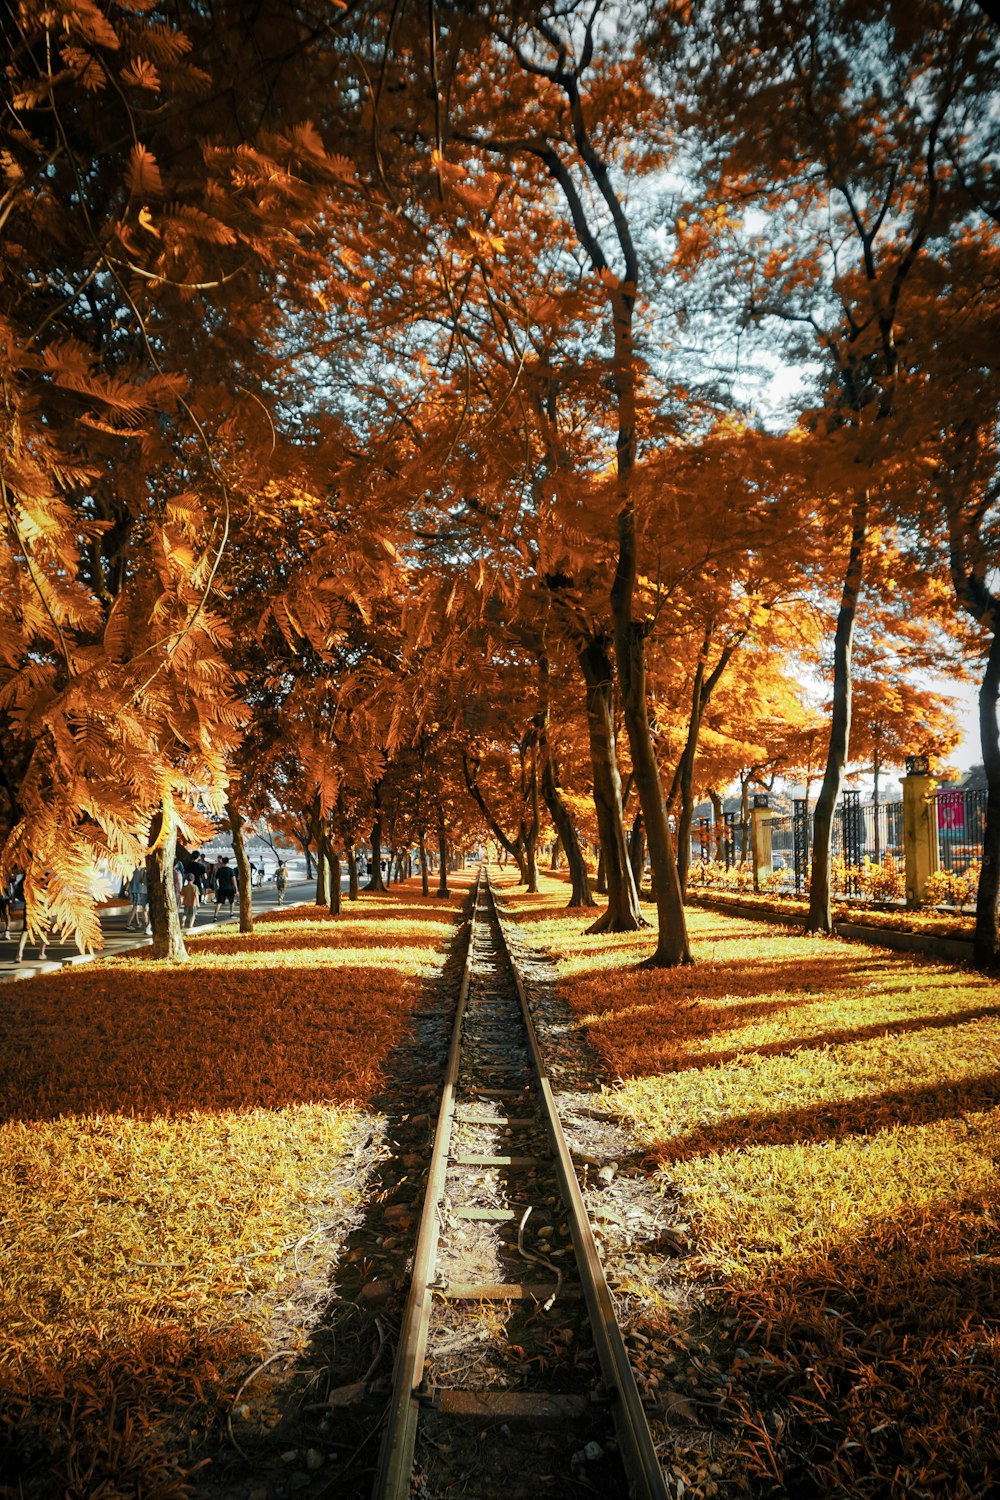 a train track running through a park filled with trees